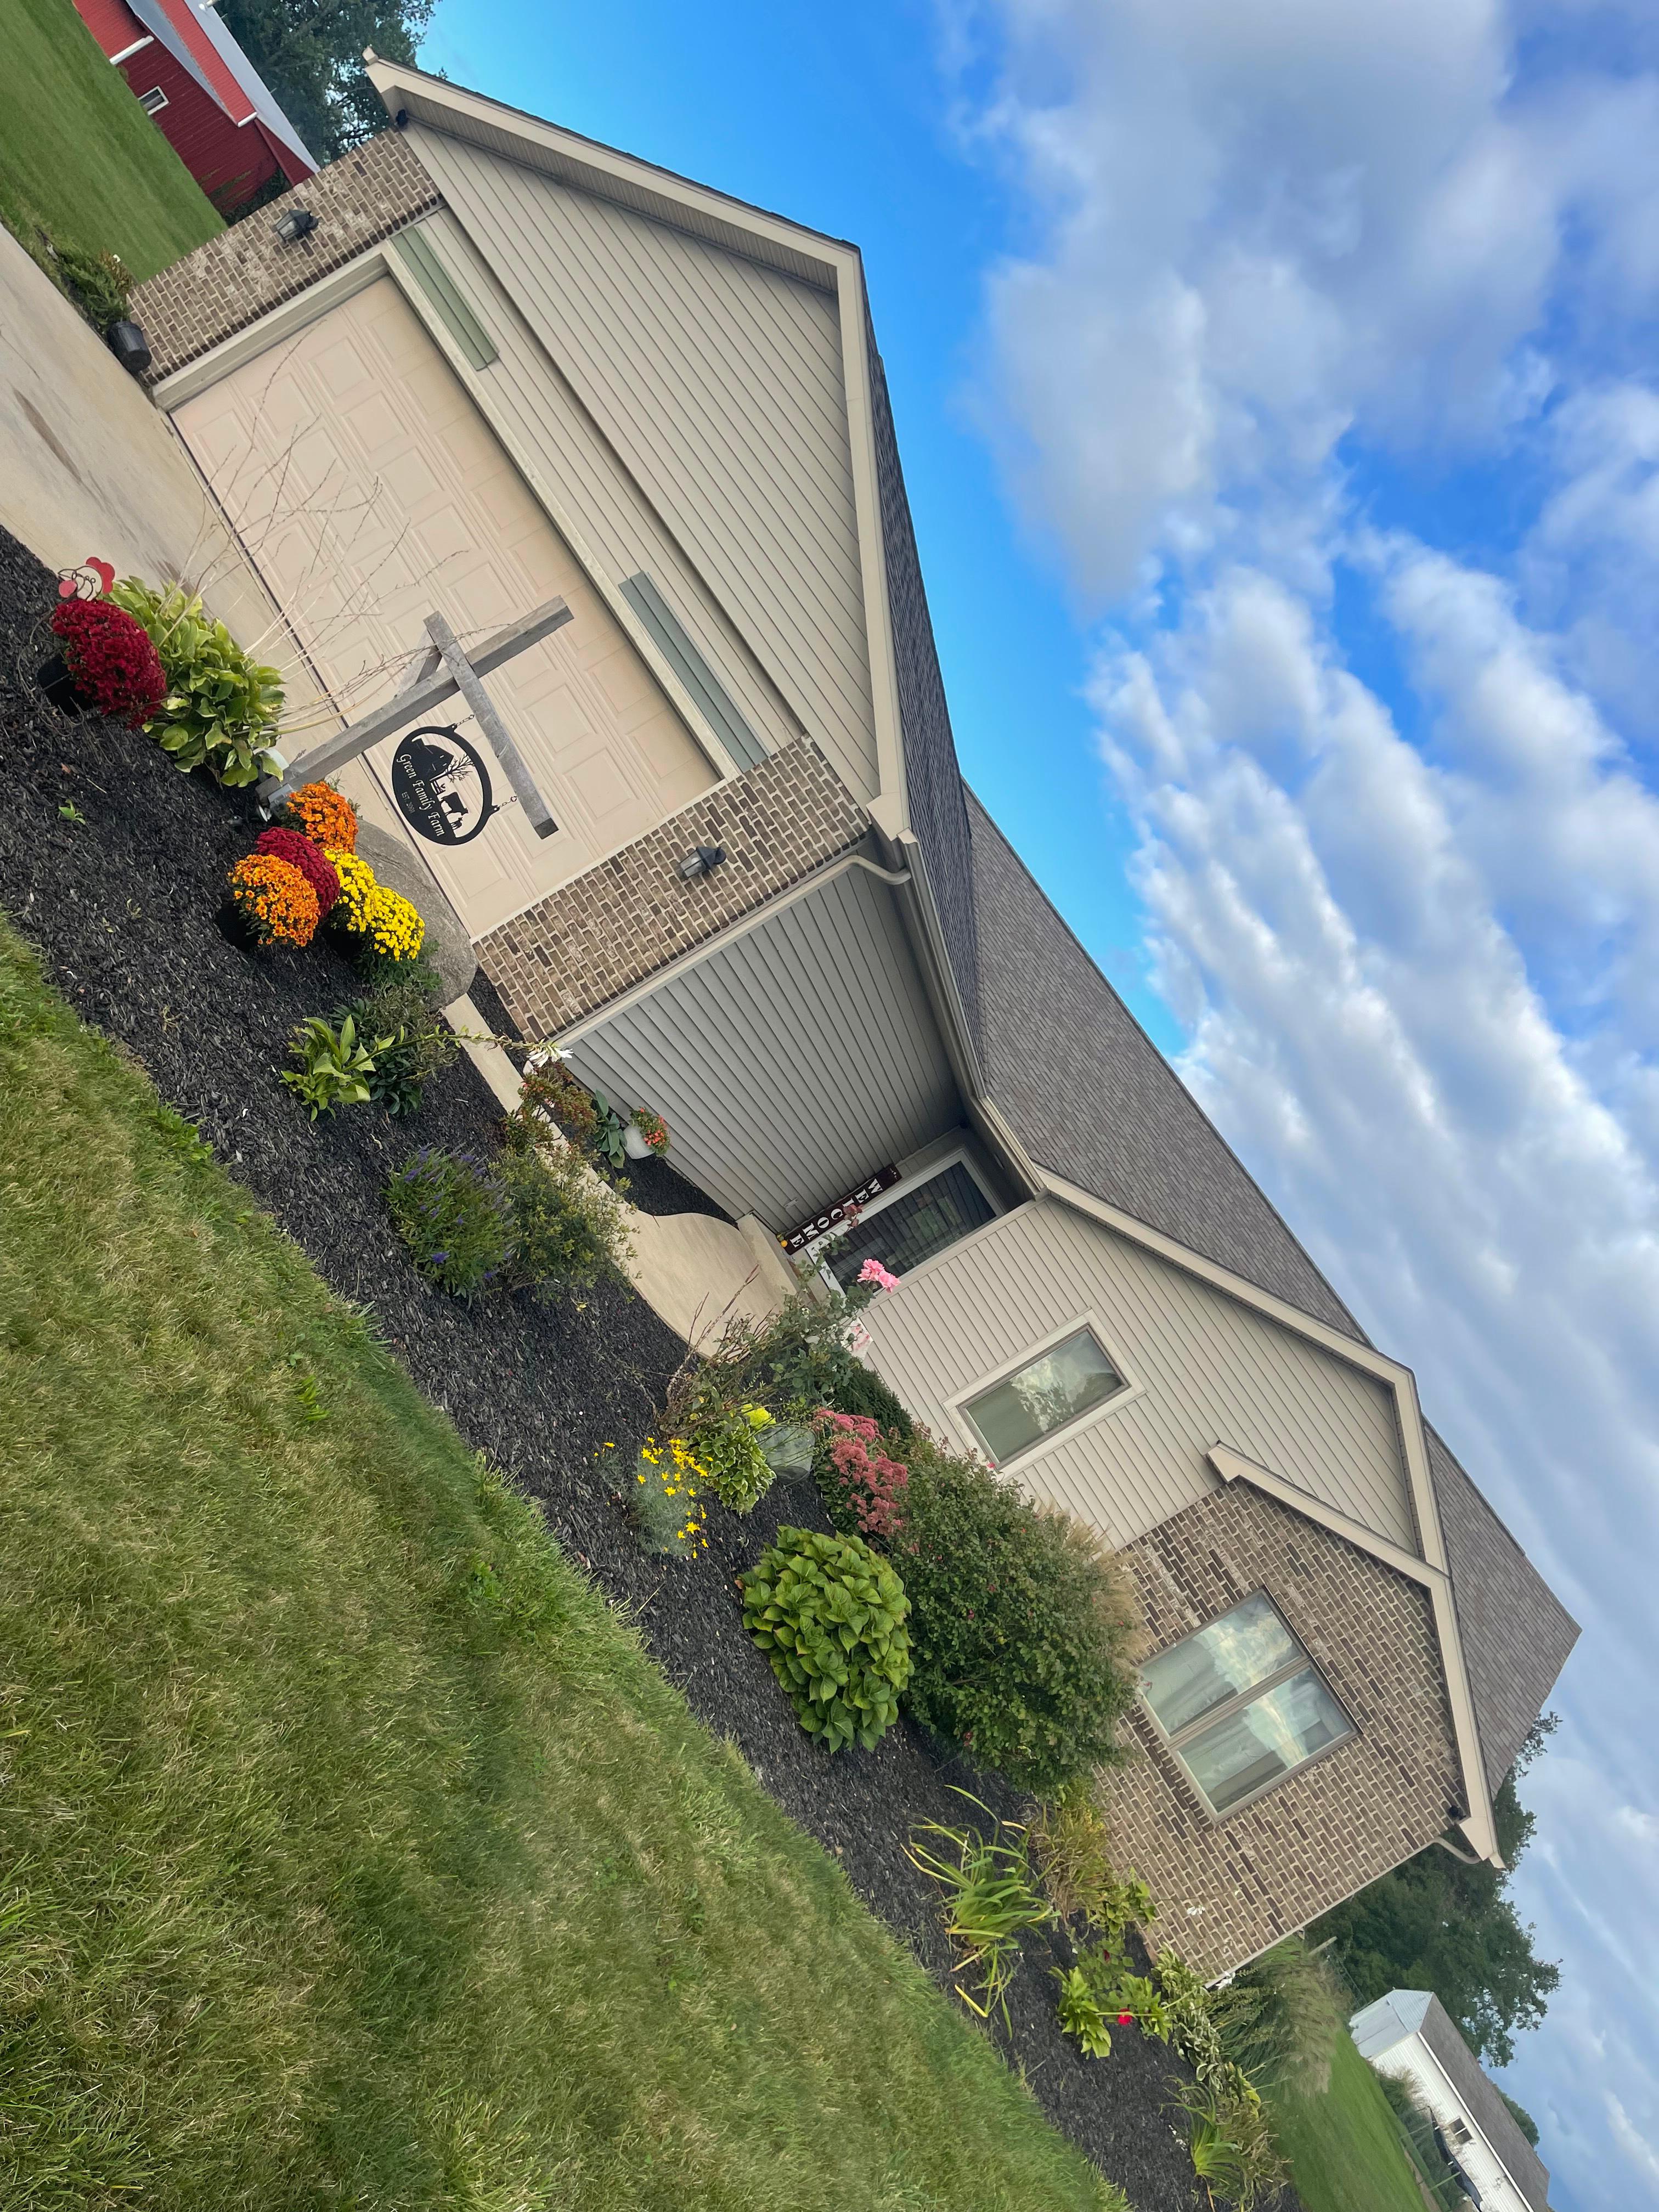 J & G Home Improvements LLC specializes in exterior renovations in Albion, IN, to give your home a fresh and appealing look. Our services cover everything from siding and roofing to landscaping and outdoor living spaces.